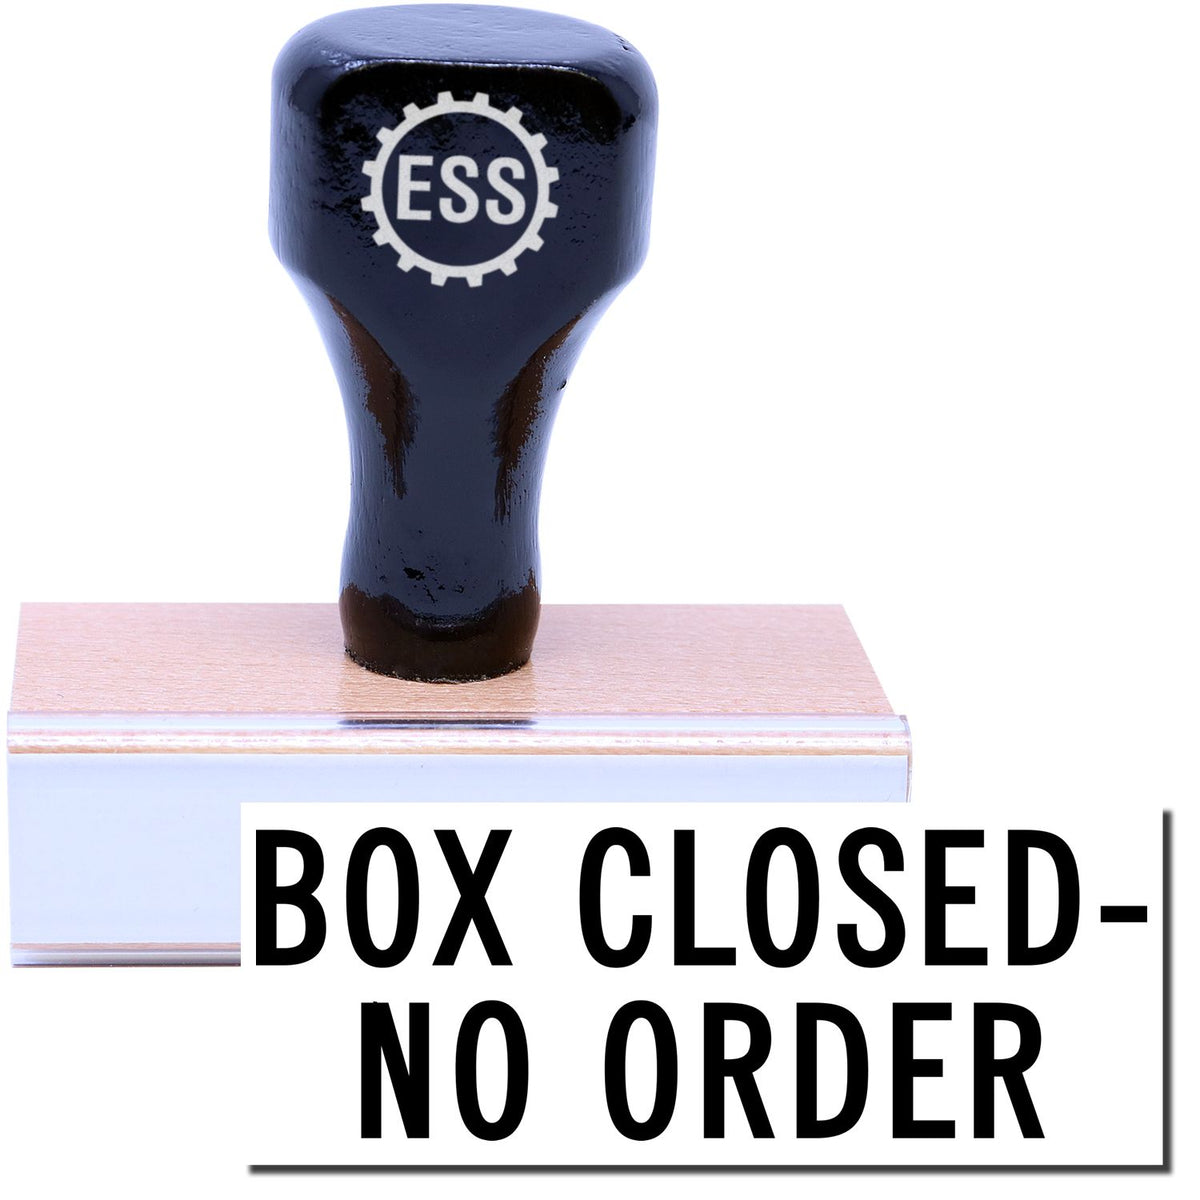 A stock office rubber stamp with a stamped image showing how the text &quot;BOX CLOSED - NO ORDER&quot; is displayed after stamping.